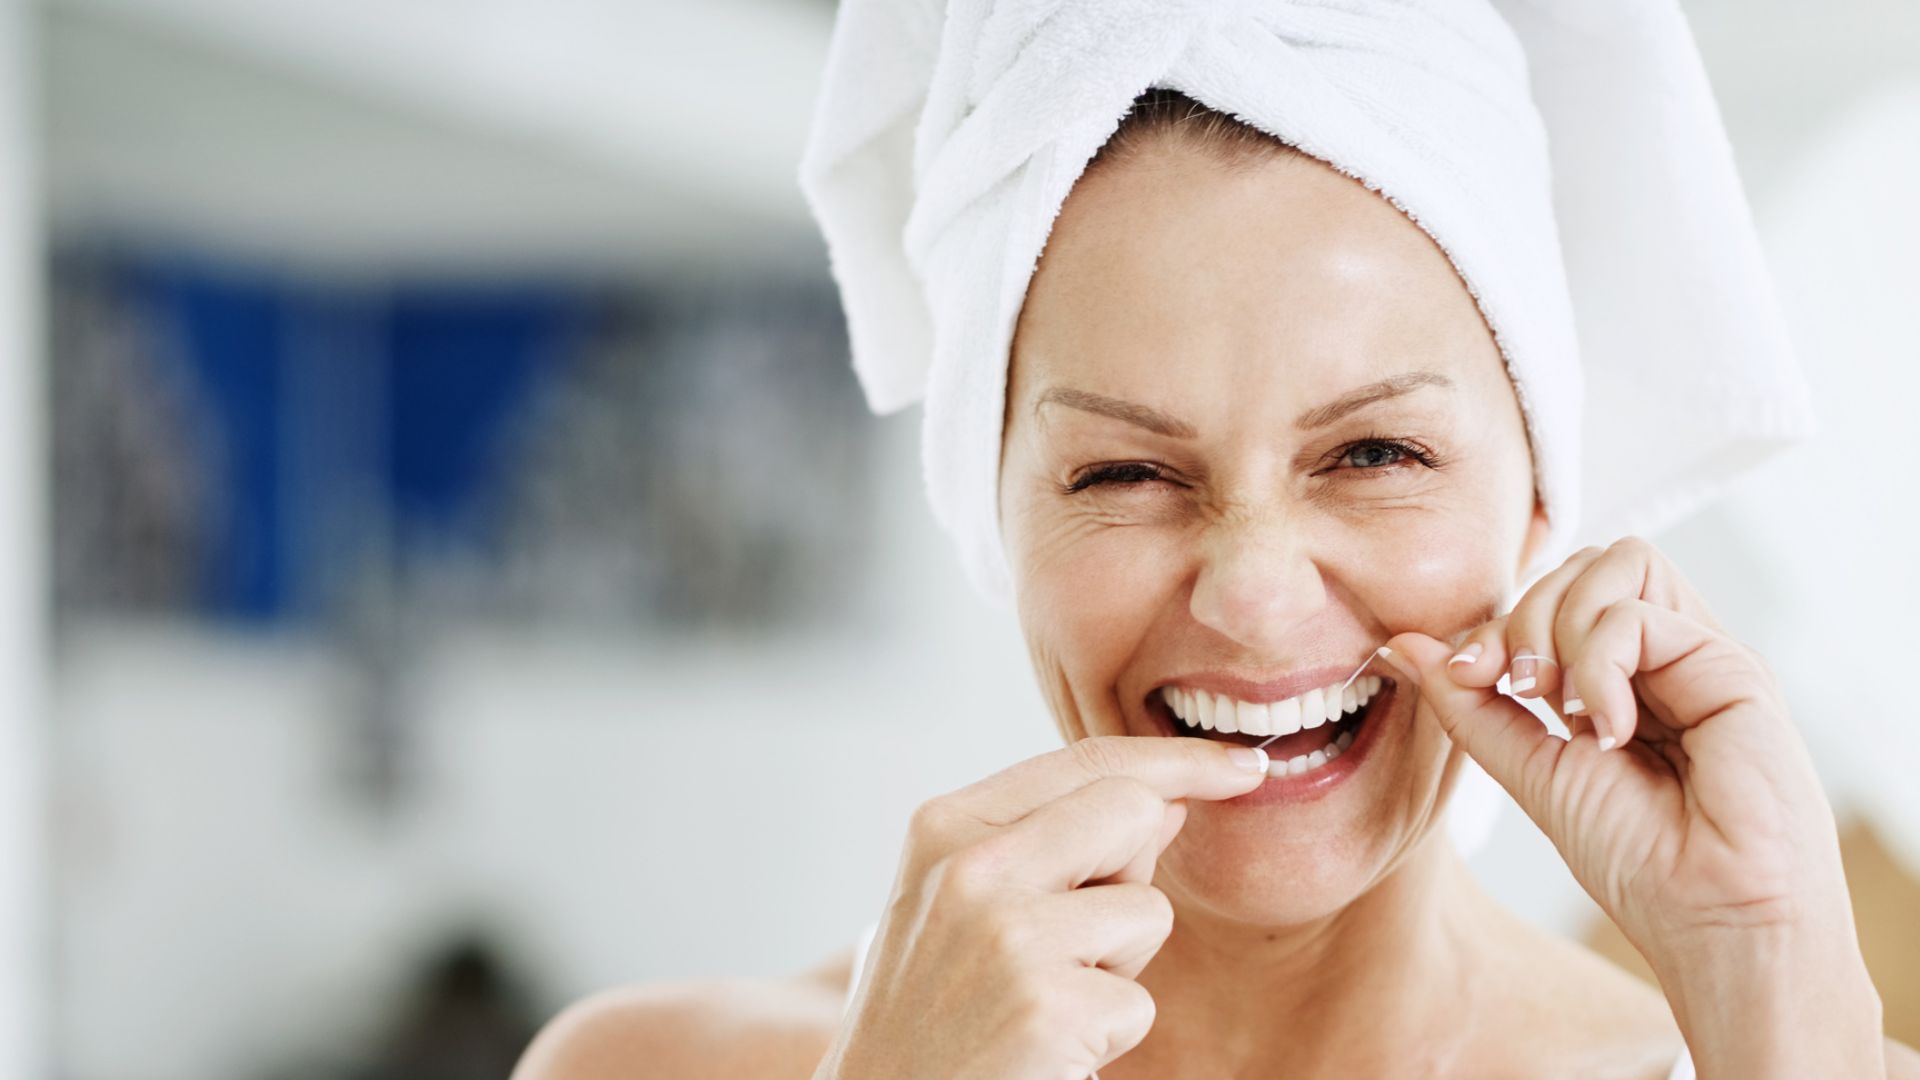 Brushing and Flossing Your Teeth are Important <br>– Here are 6 Reasons